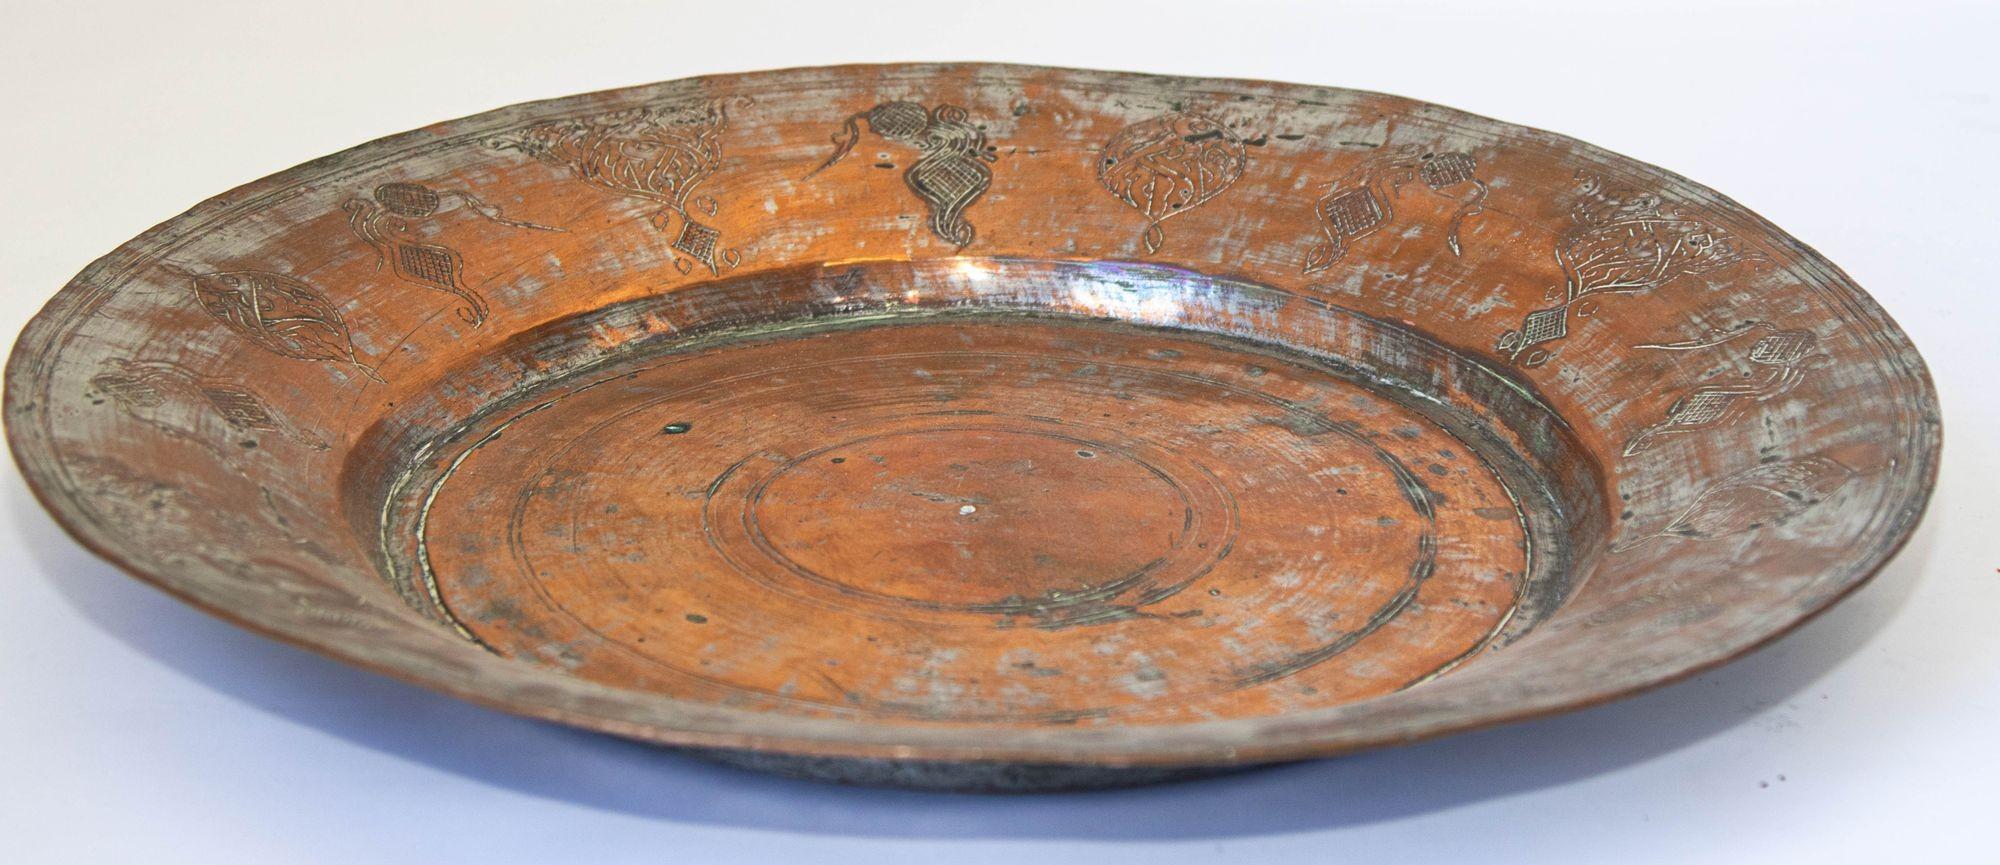 Large Antique Tinned Copper Rajasthani Vessel Bowl 10